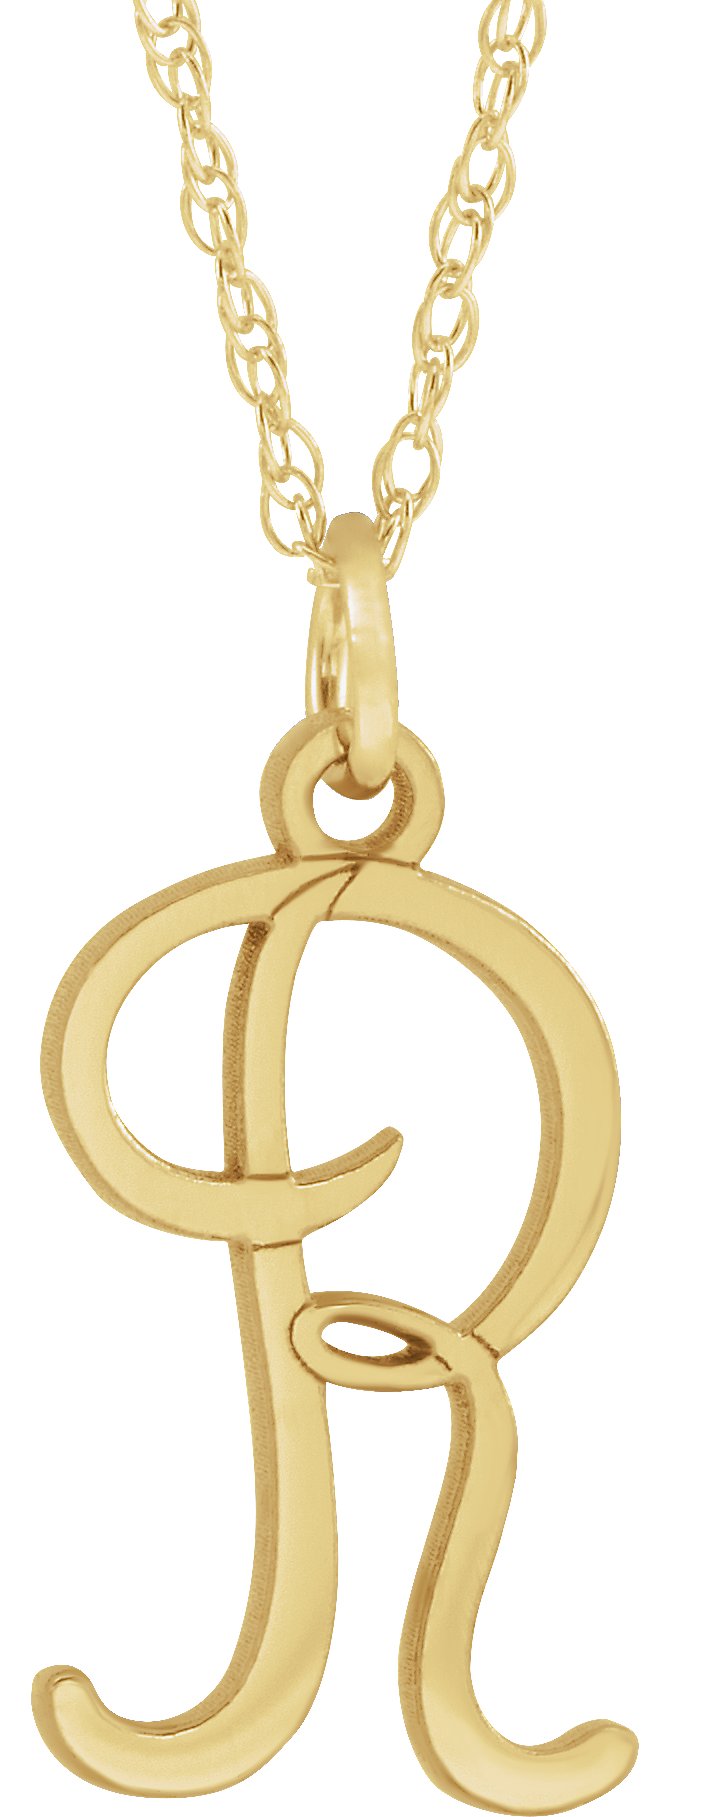 14K Yellow Gold-Plated Sterling Silver Script Initial R 16-18" Necklace